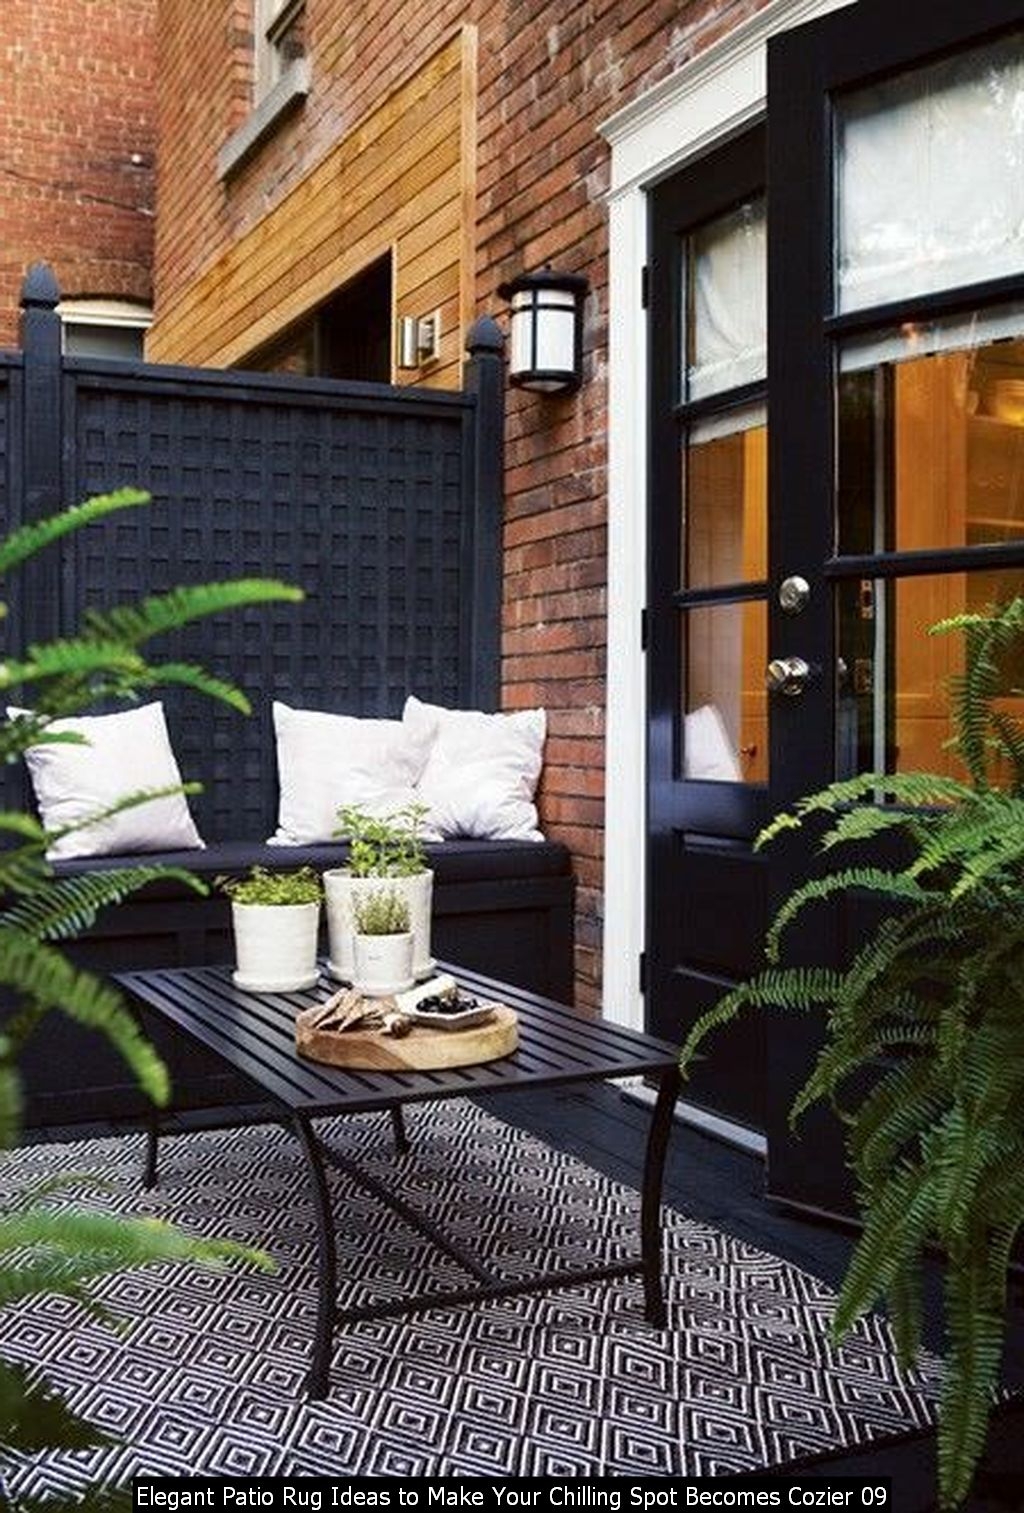 Elegant Patio Rug Ideas To Make Your Chilling Spot Becomes Cozier 09